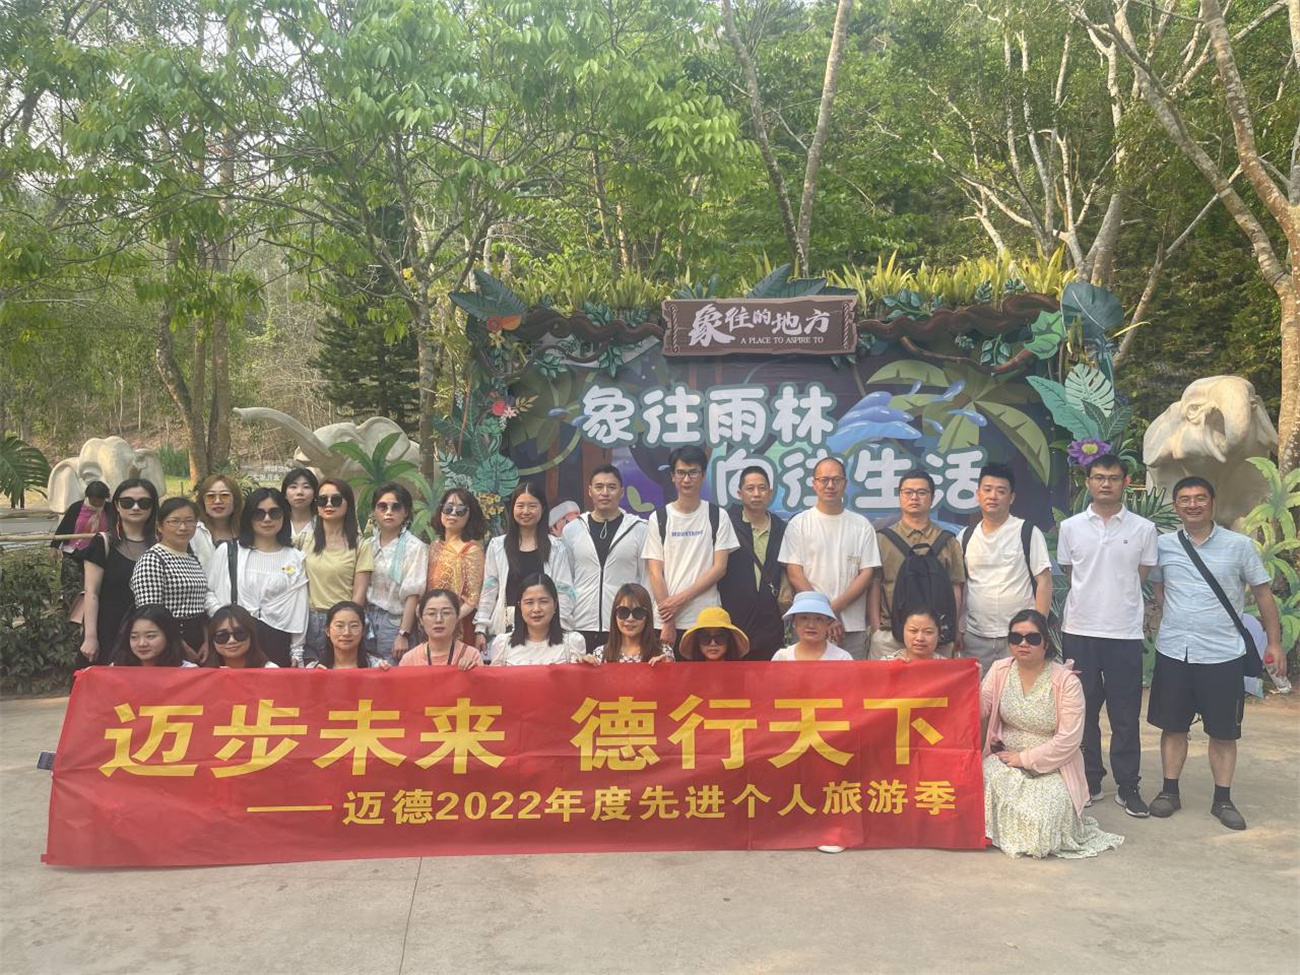 April is a season full of joy and happiness. In the end of this happy season, the leaders of the Mind family led the outstanding employees to the beautiful place-Xishuangbanna city,Yunnan Province, and spent a relaxing and (1)